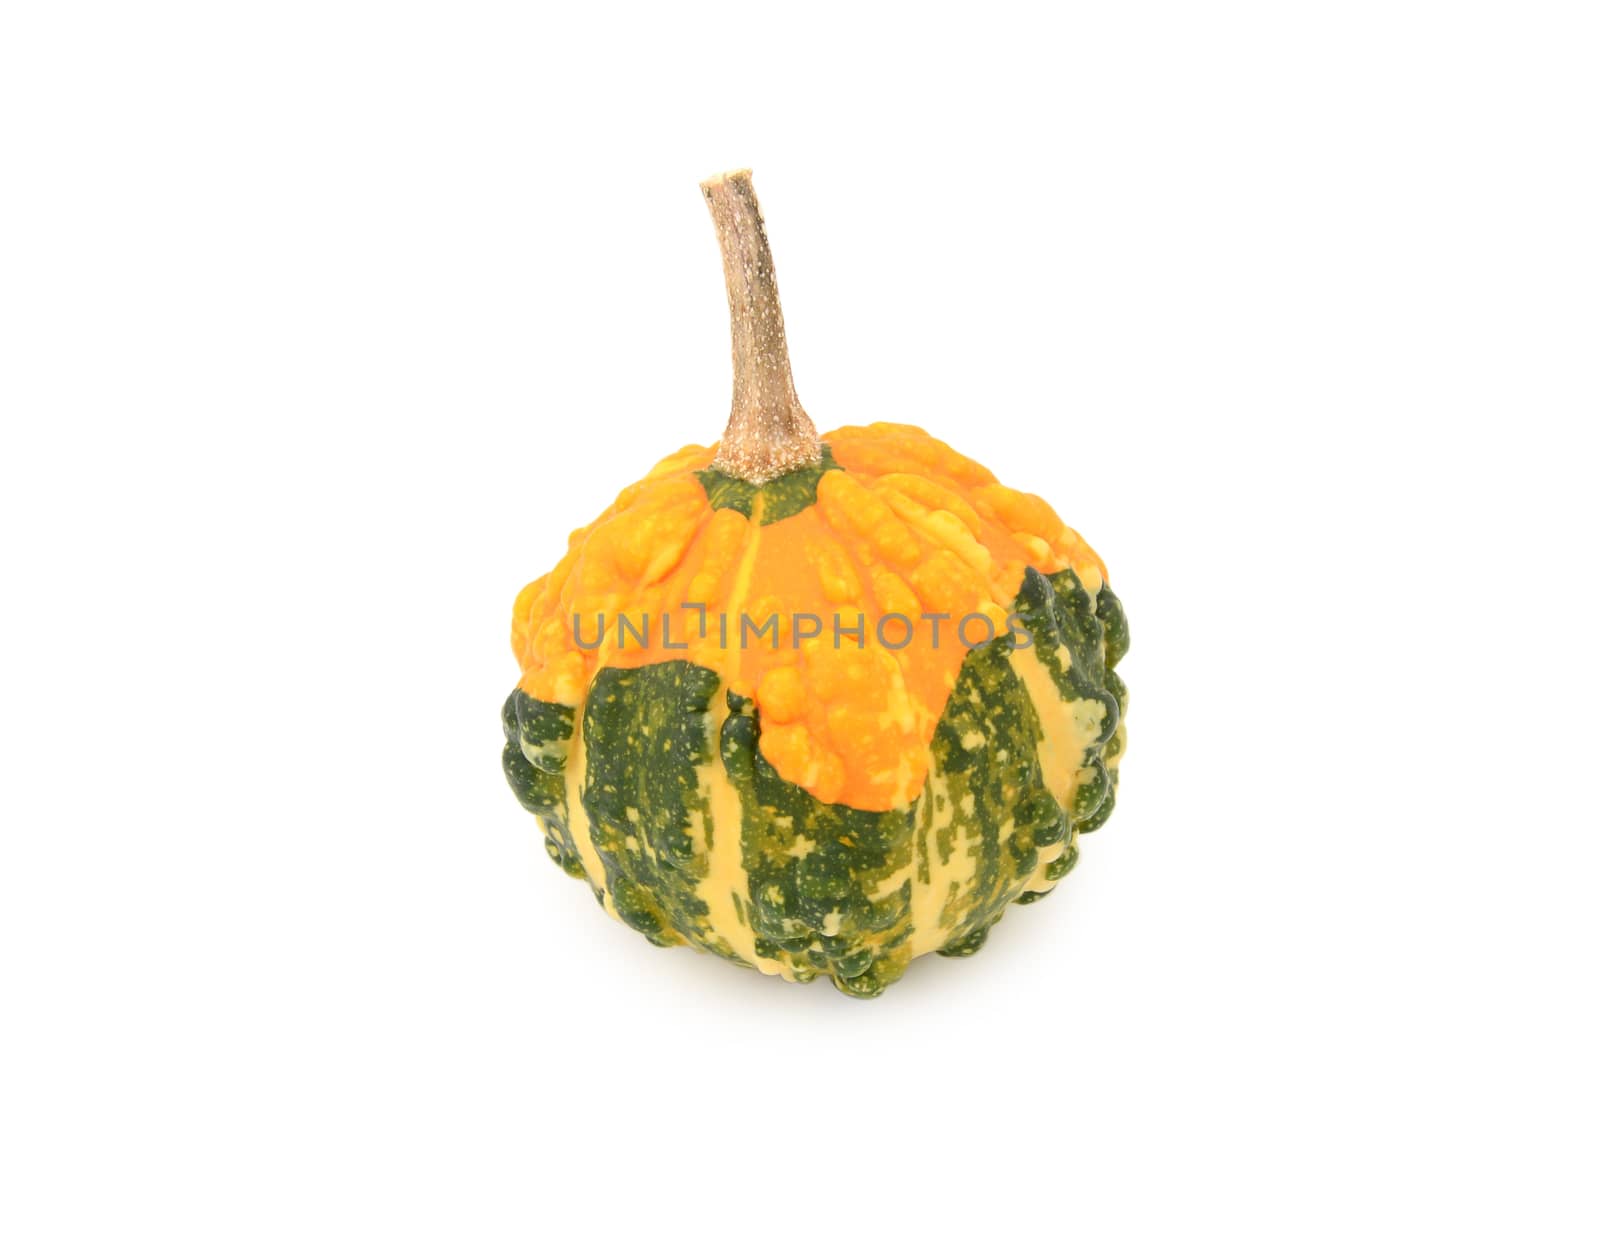 Autumnal warted gourd - orange skin and green and yellow stripes by sarahdoow